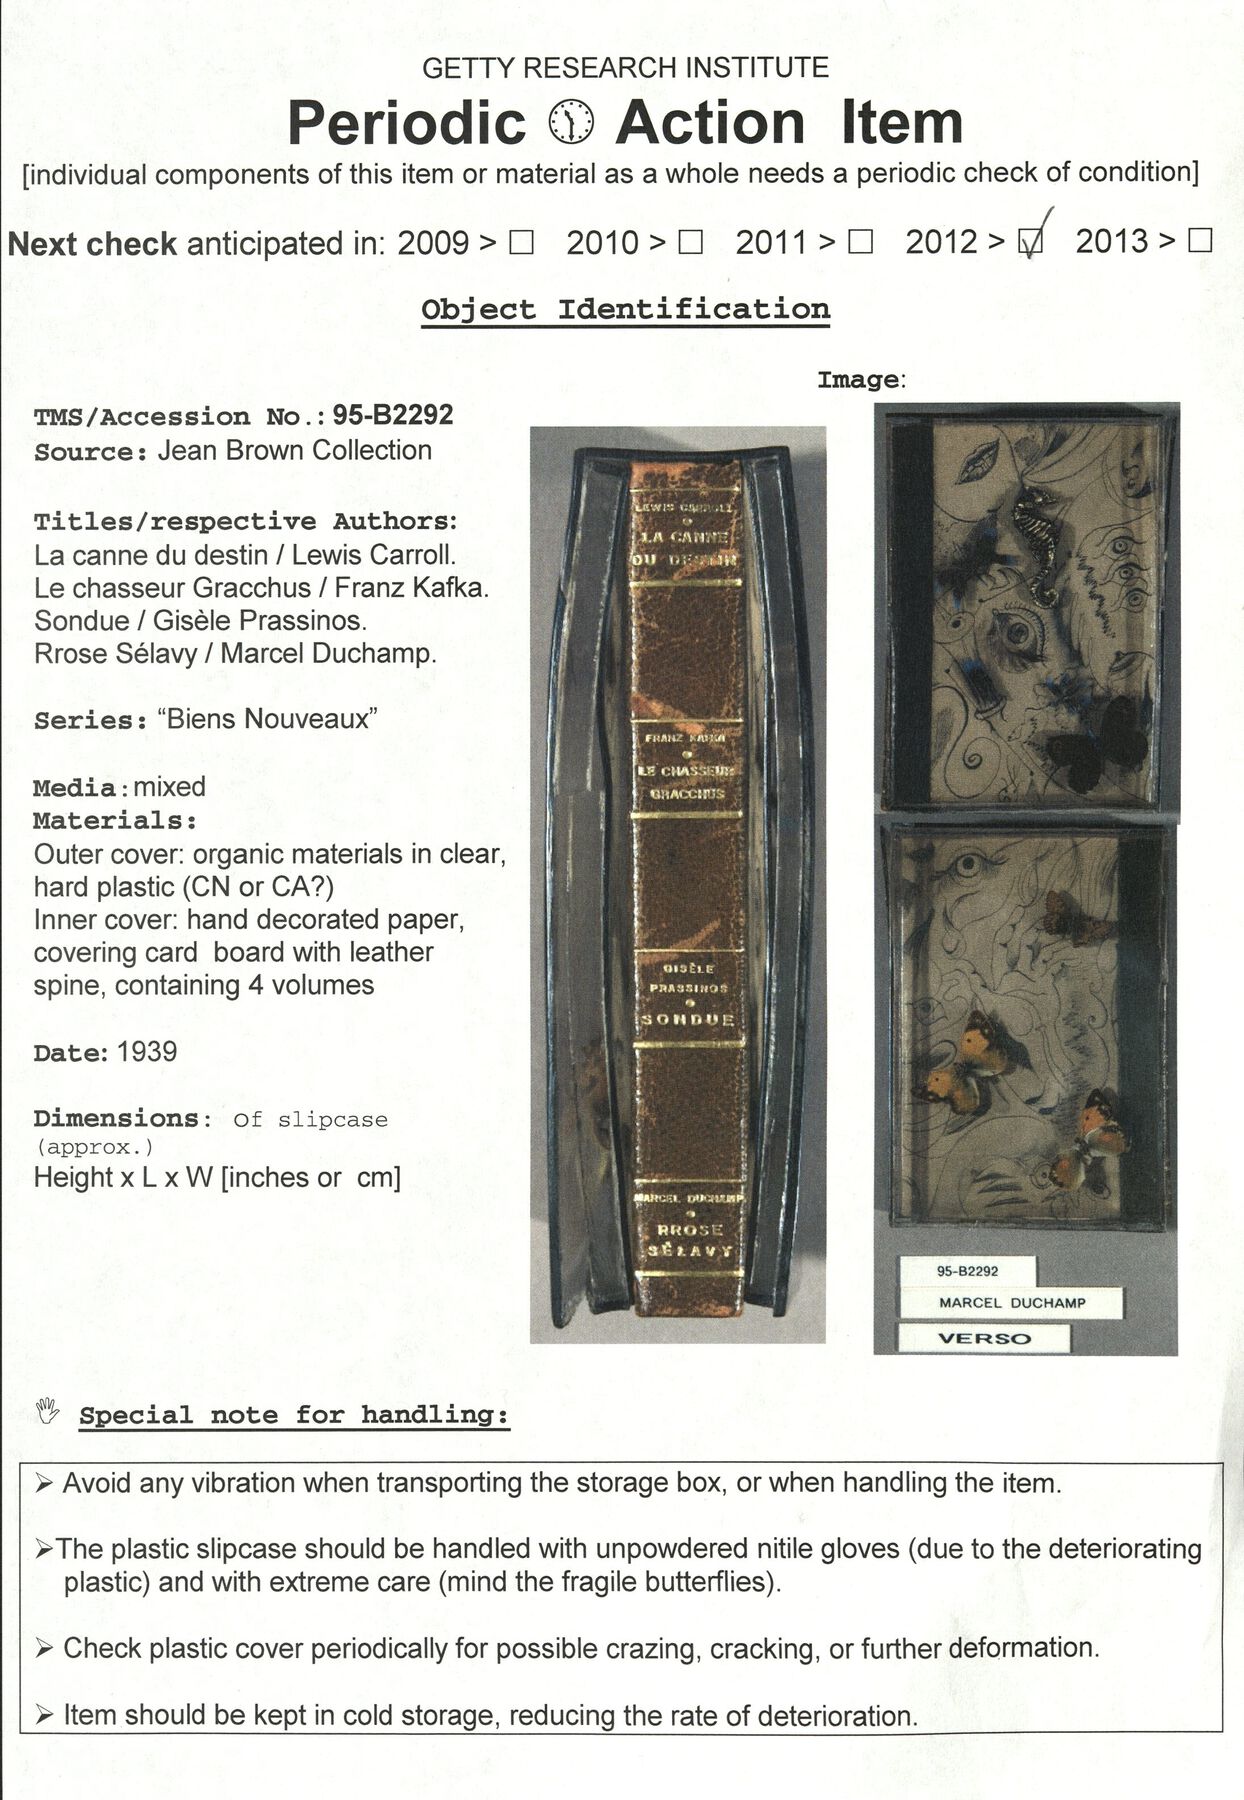 A flyer providing information of a book sculpture and how it should be handled 